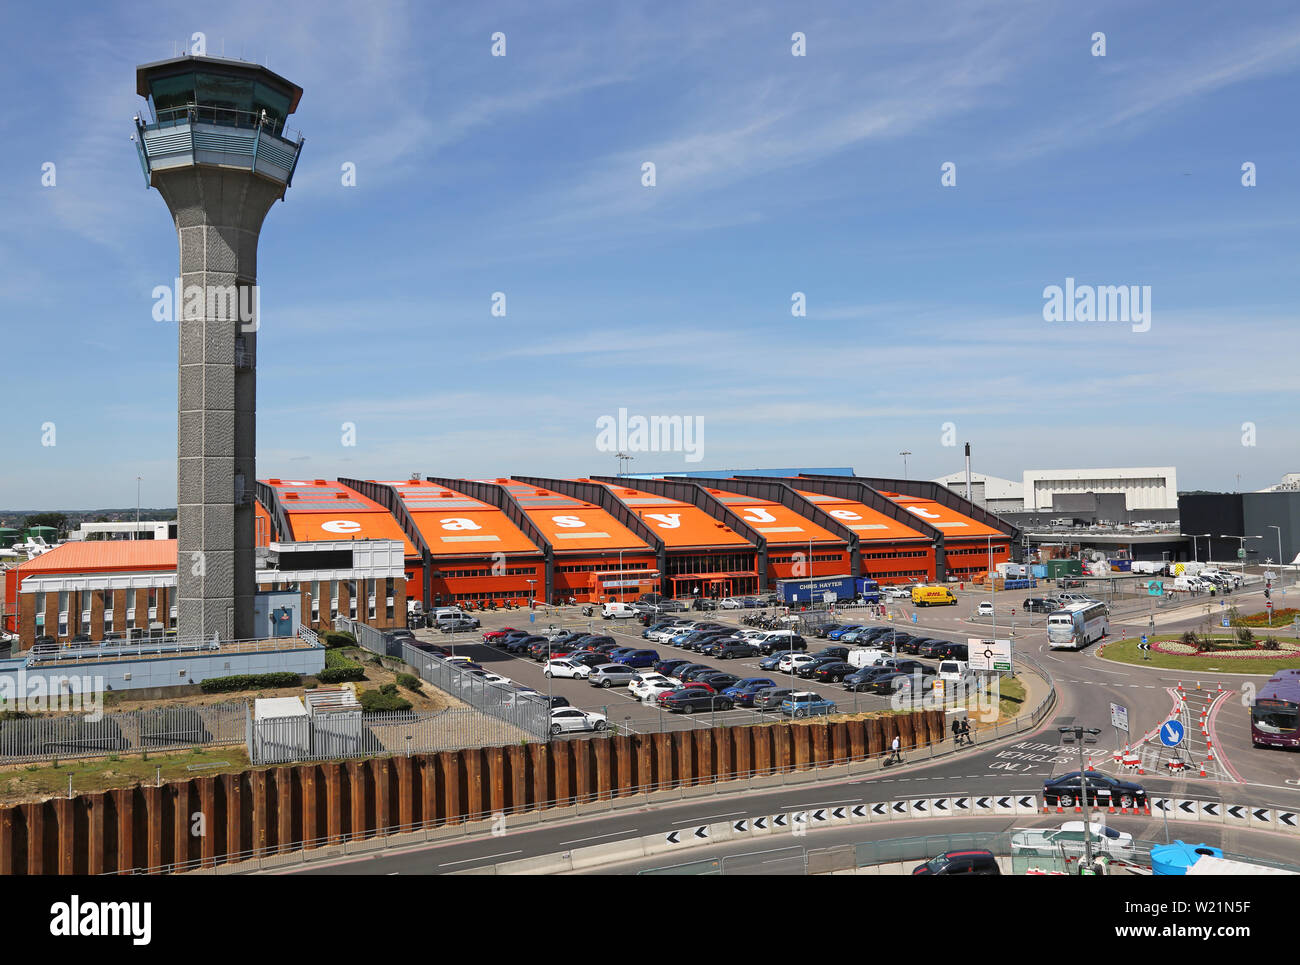 London Luton Airport, central area showing Easyjet Head Office (converted from the former aircraft Hangar 89) and main control tower. Stock Photo